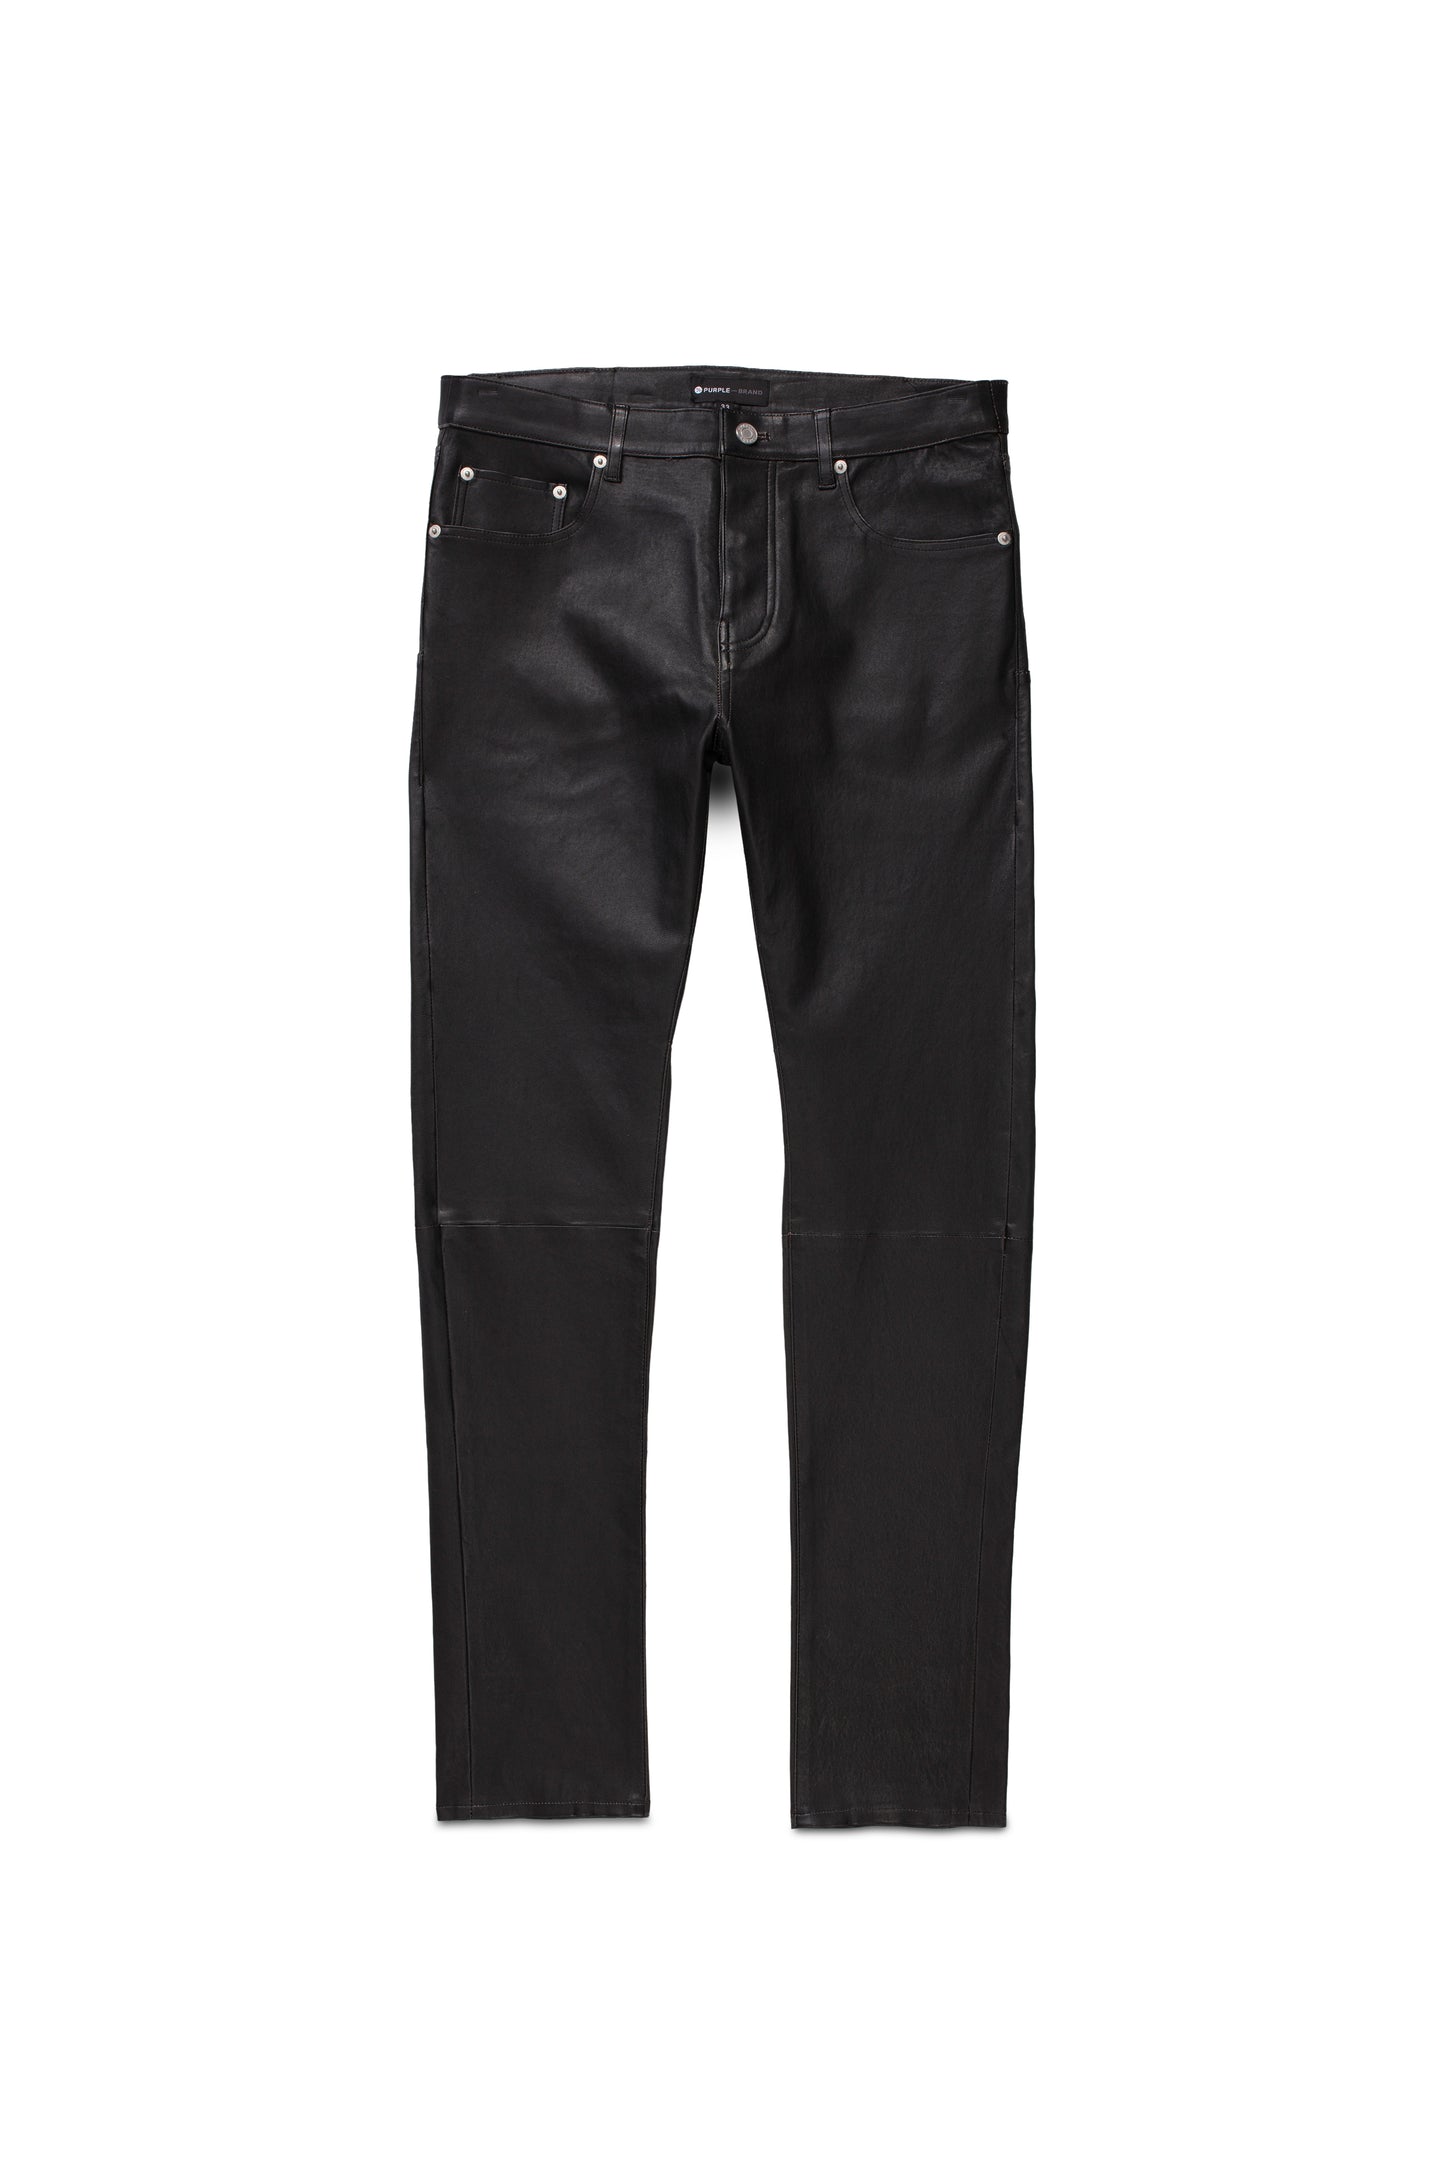 P001 LOW RISE SKINNY PANT - Stretch Leather Black Beauty